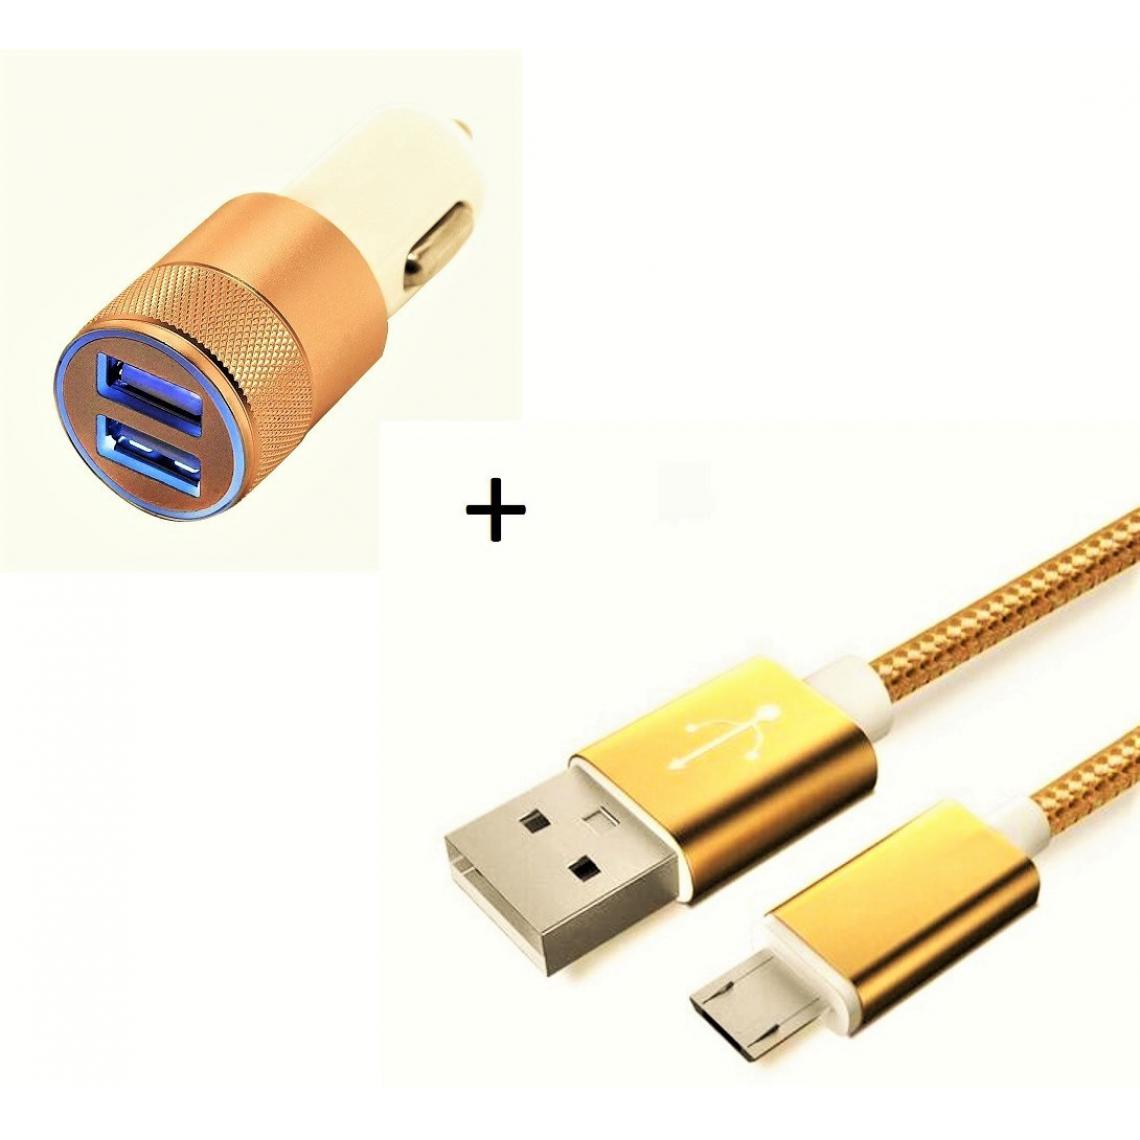 Shot - Pack Chargeur Voiture pour GIONEE F9 Smartphone Micro USB (Cable Metal Nylon + Double Adaptateur Allume Cigare) (OR) - Chargeur Voiture 12V